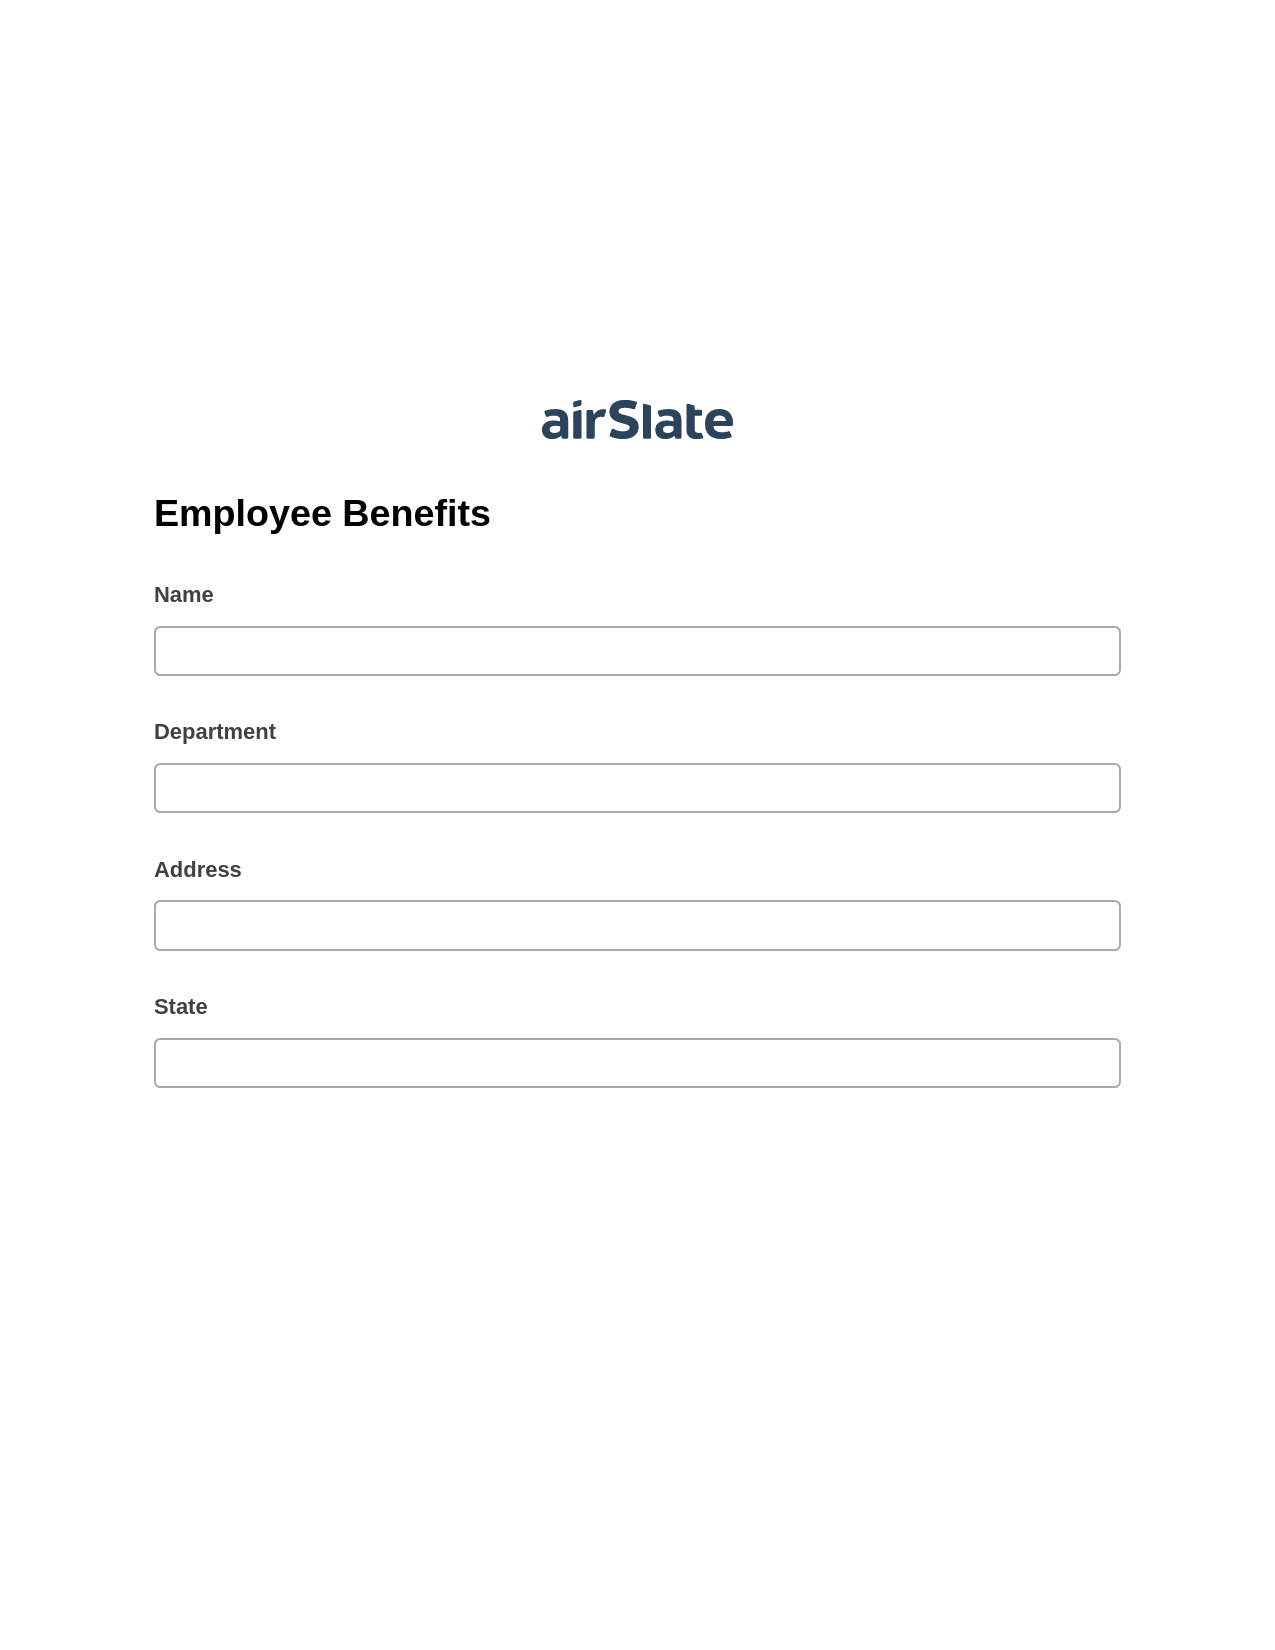 Employee Benefits Pre-fill Slate from MS Dynamics 365 Records Bot, Document Hide Bot, Export to NetSuite Record Bot